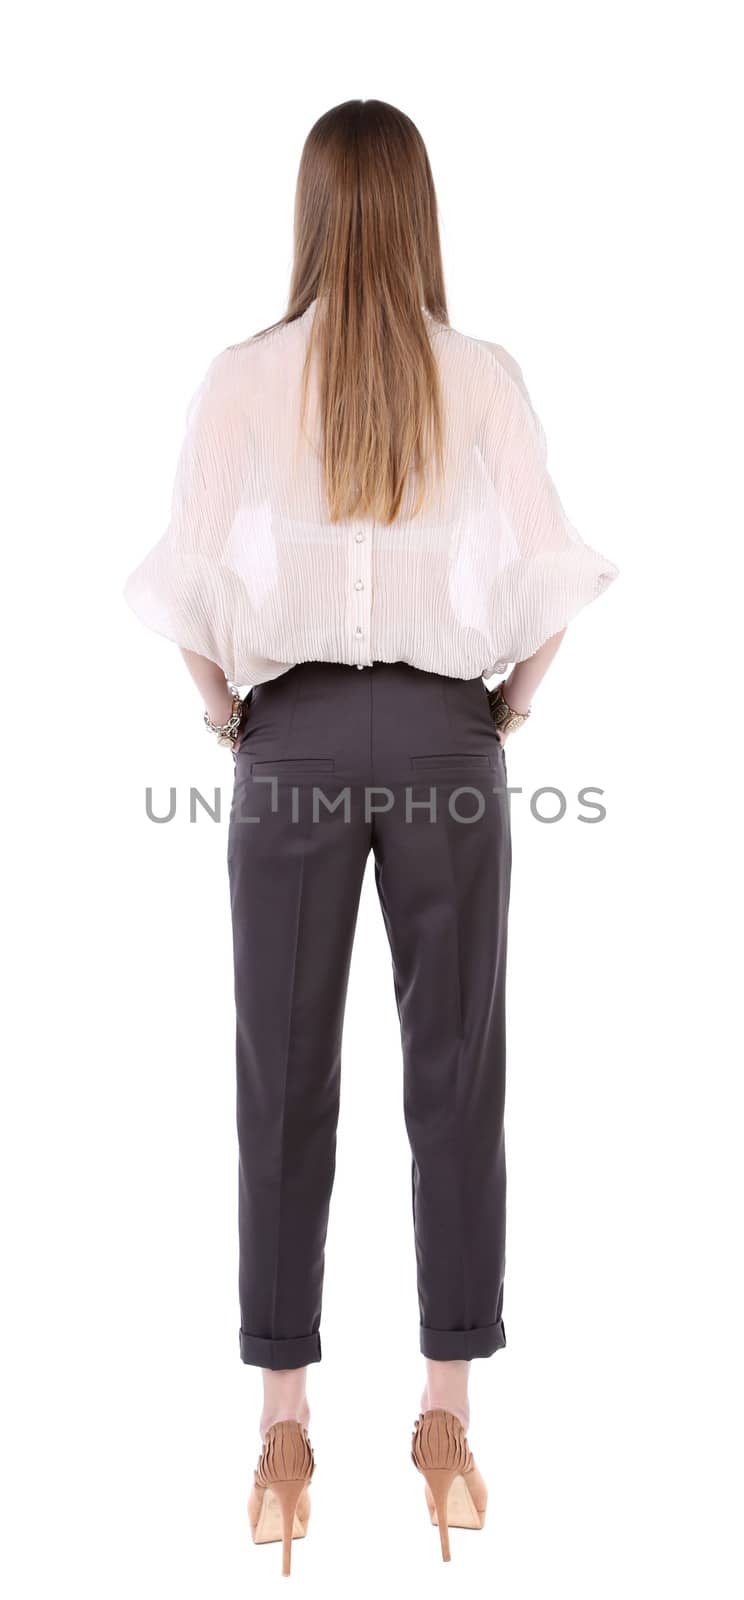 Fashionable young female. Isolated on a white background.